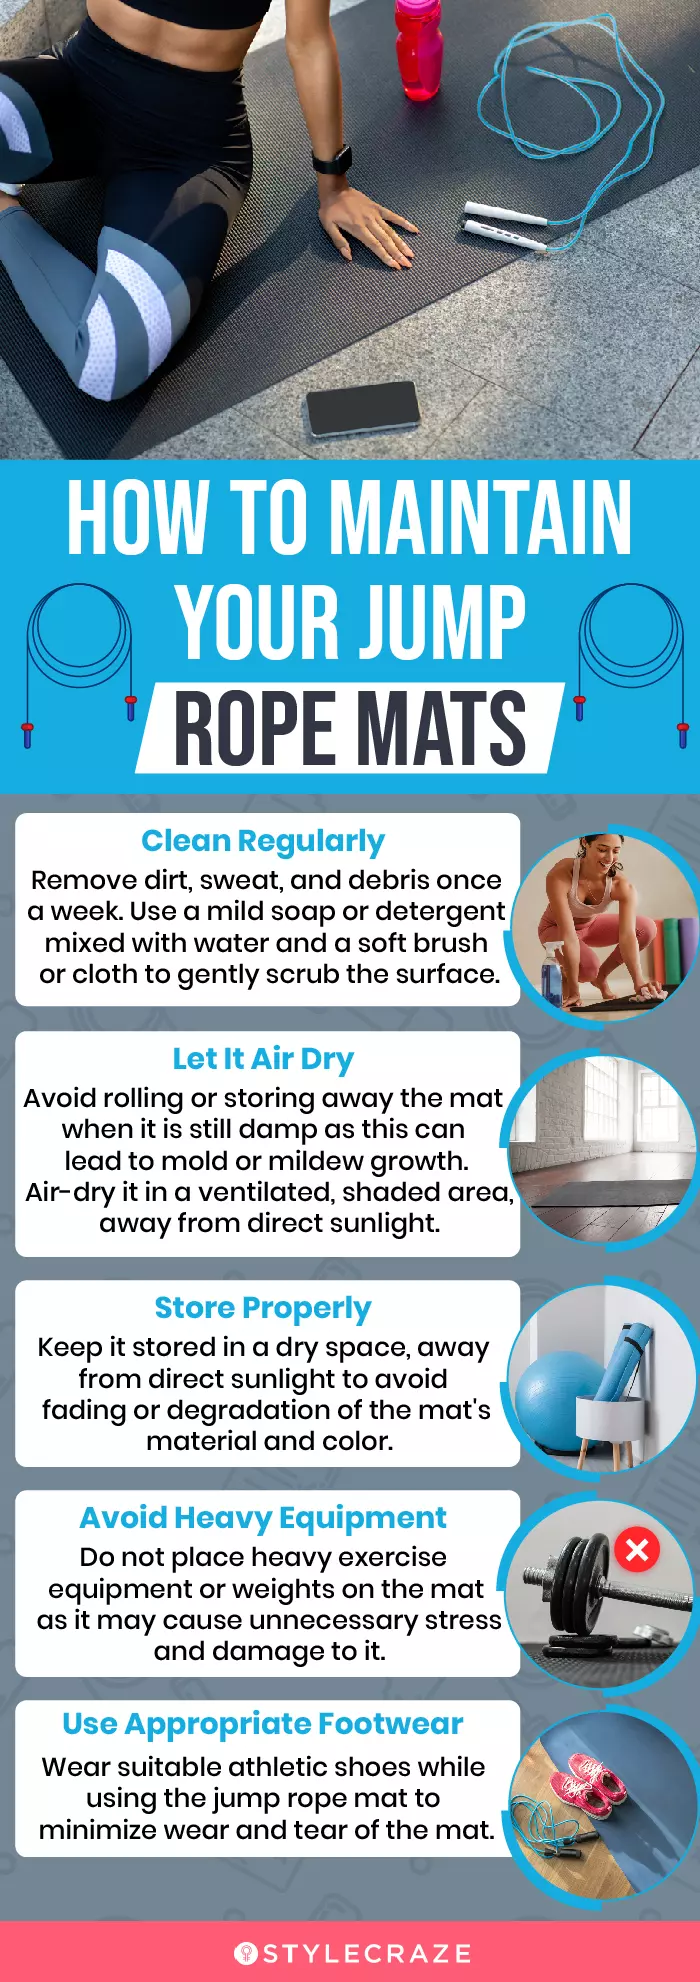 How To Maintain Your Jump Rope Mats (infographic)